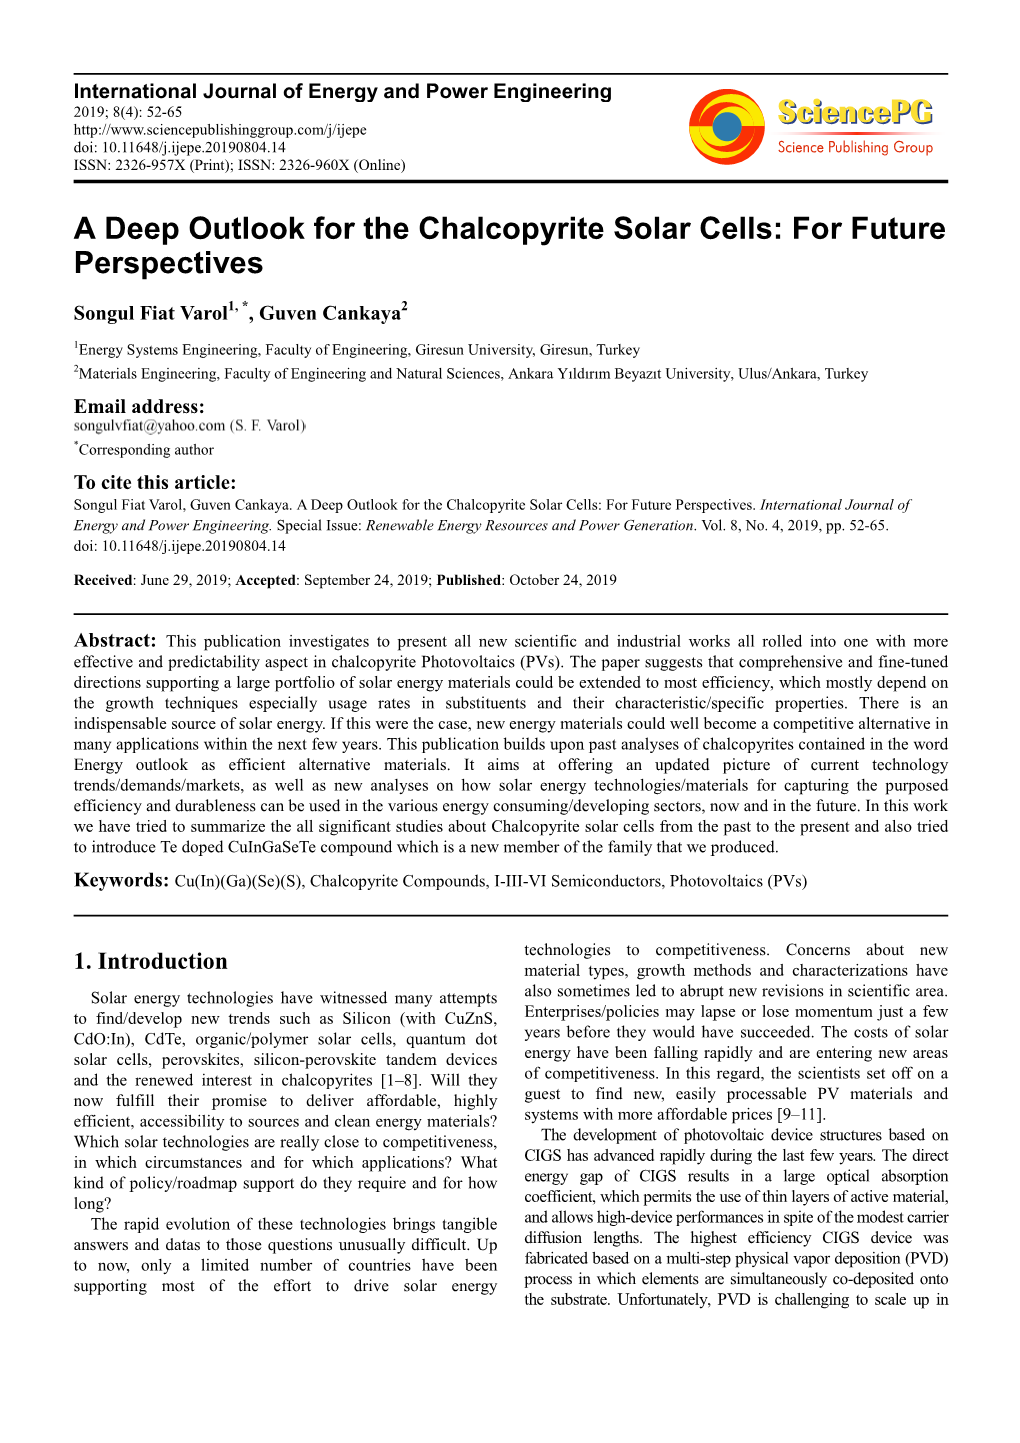 A Deep Outlook for the Chalcopyrite Solar Cells: for Future Perspectives